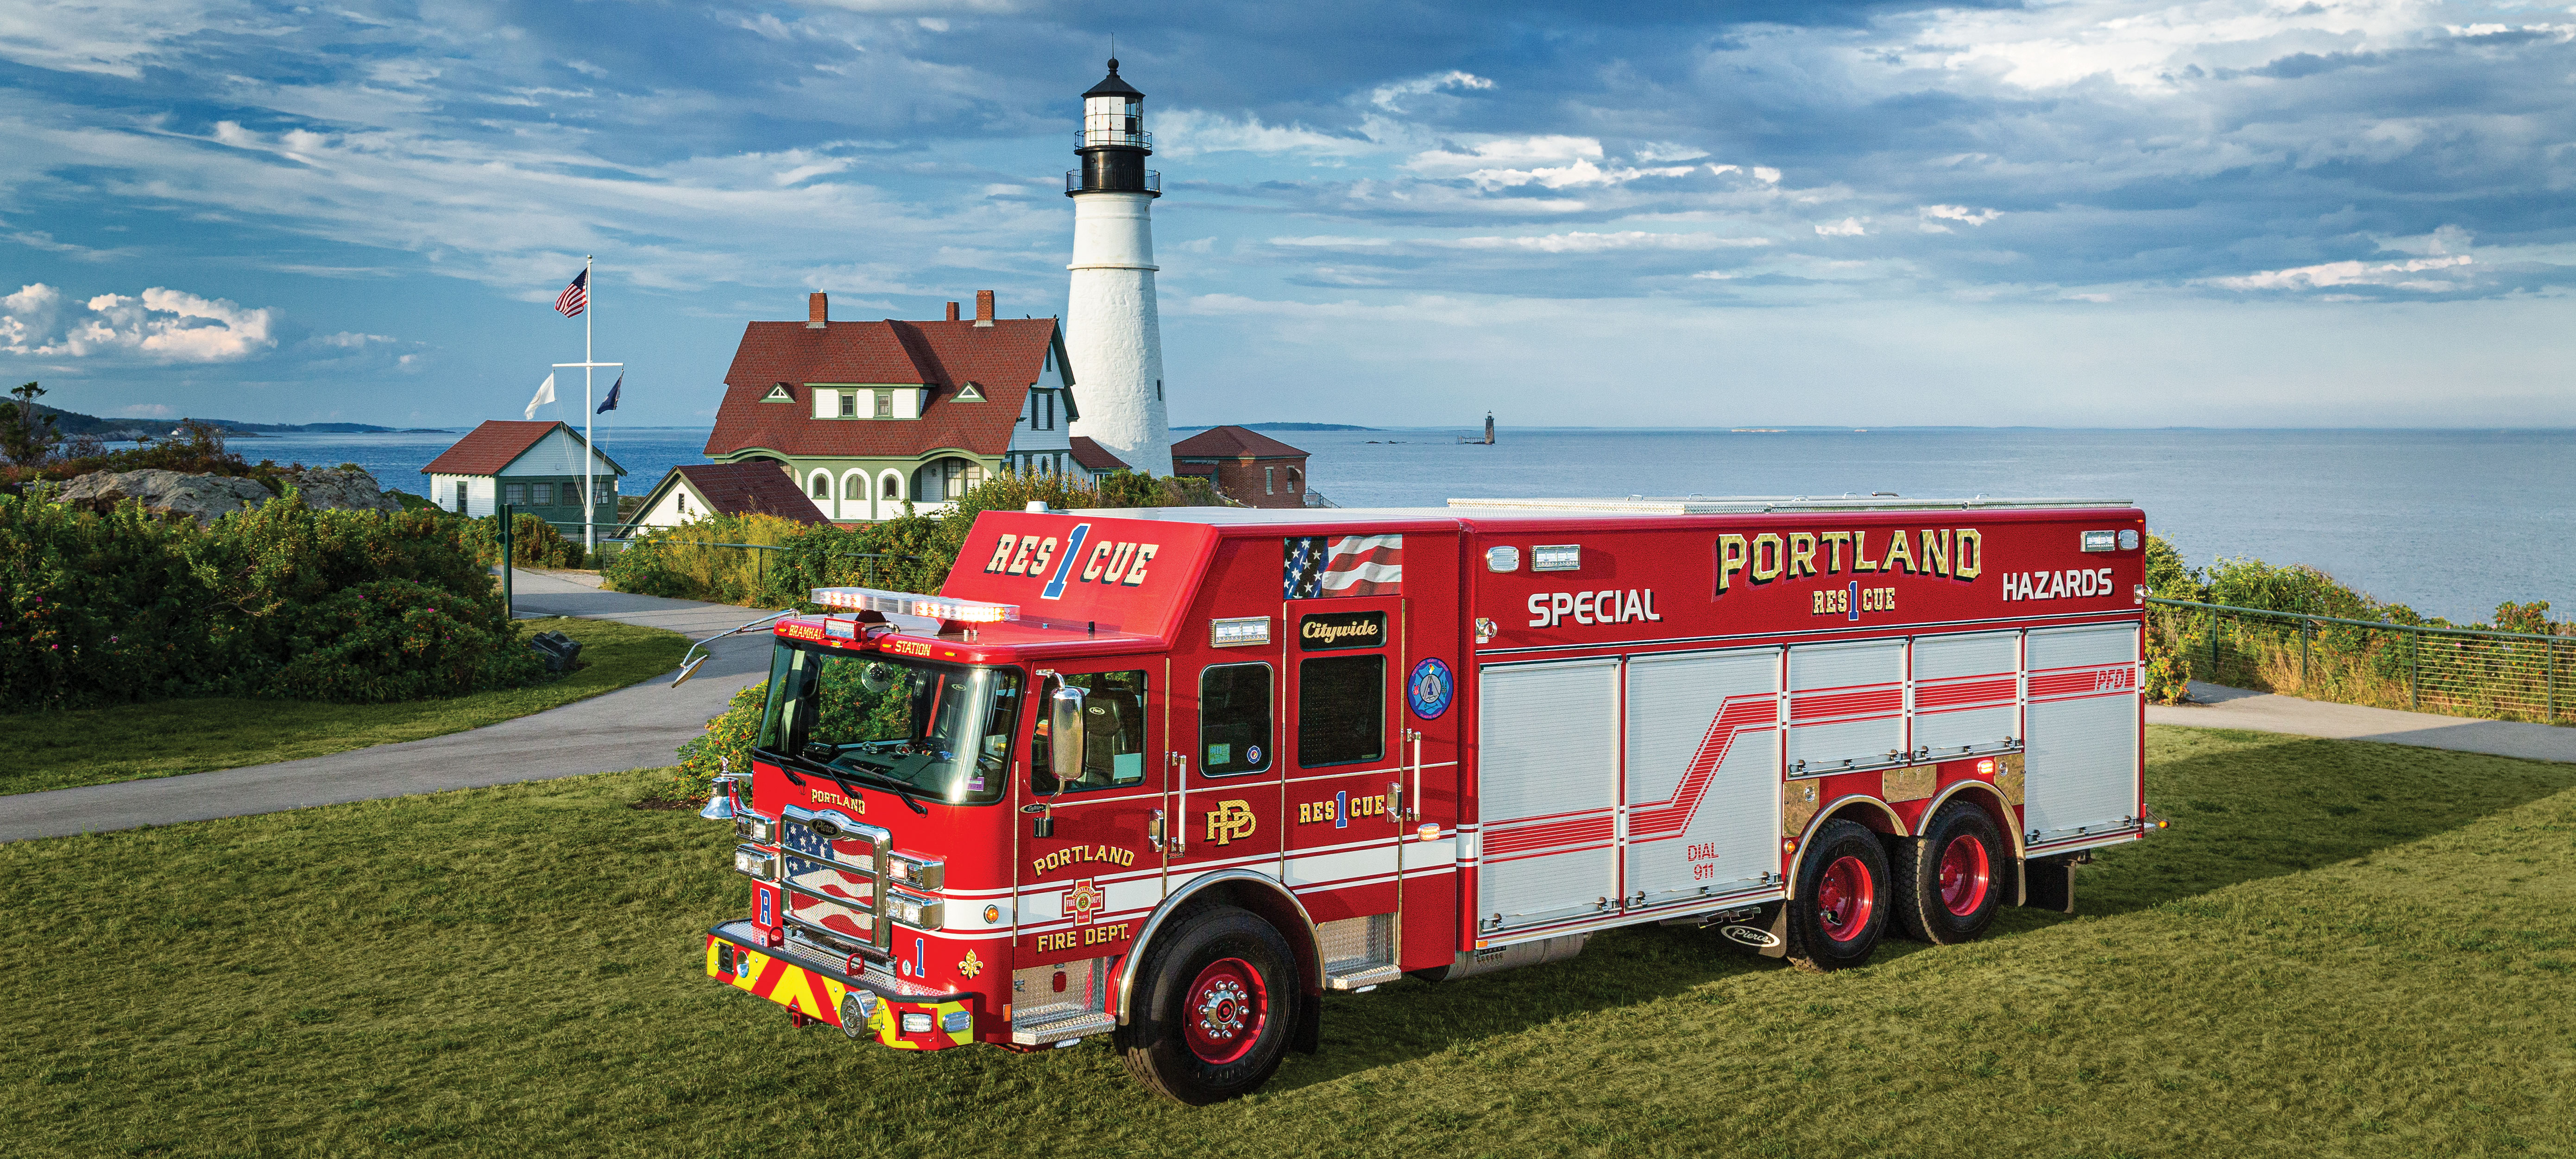 October 2021 Featured Fire Truck of the Month